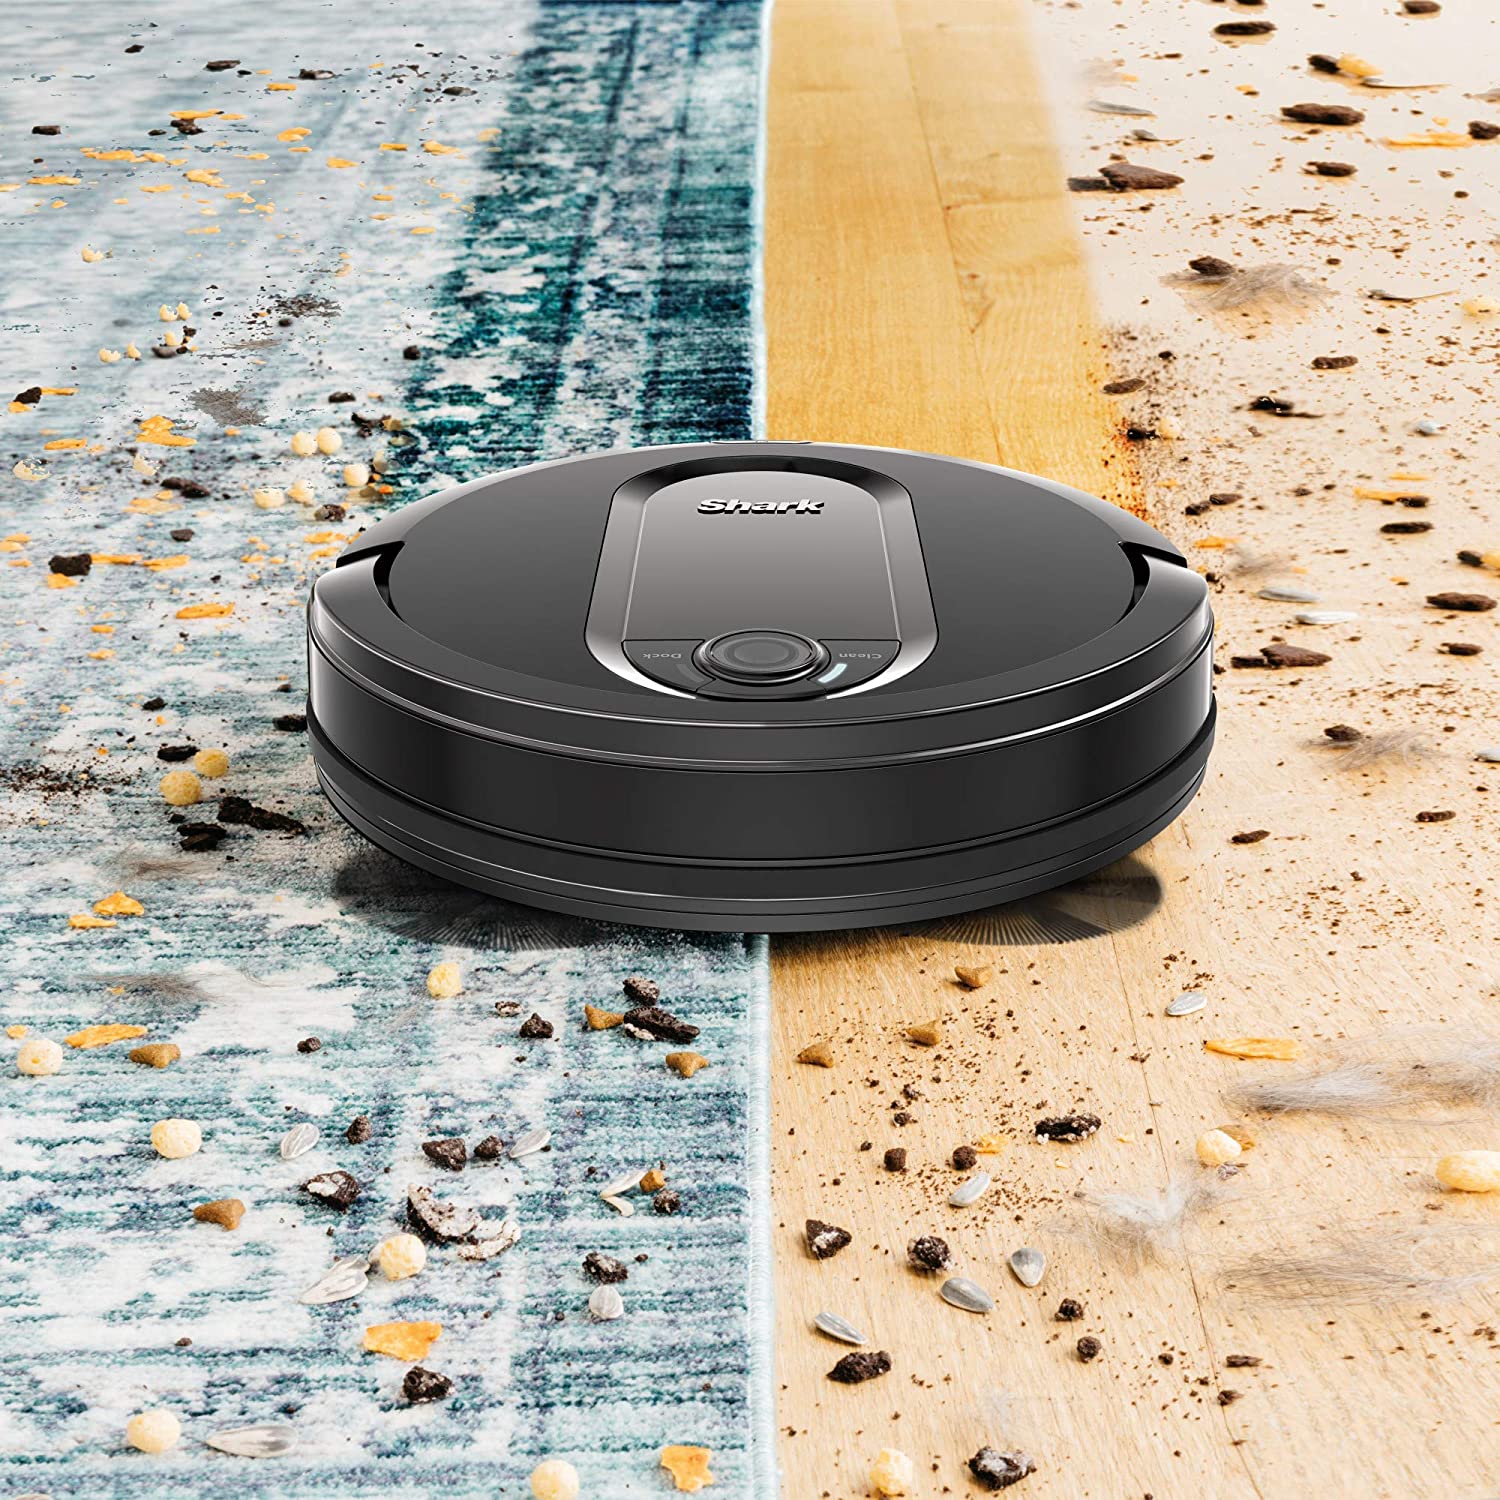 Restored Shark IQ Robot RV1100 AppControlled Robot Vacuum with Wifi and Home Mapping, Pet Hair Strong Suction with Alexa (Refurbished) - image 2 of 9